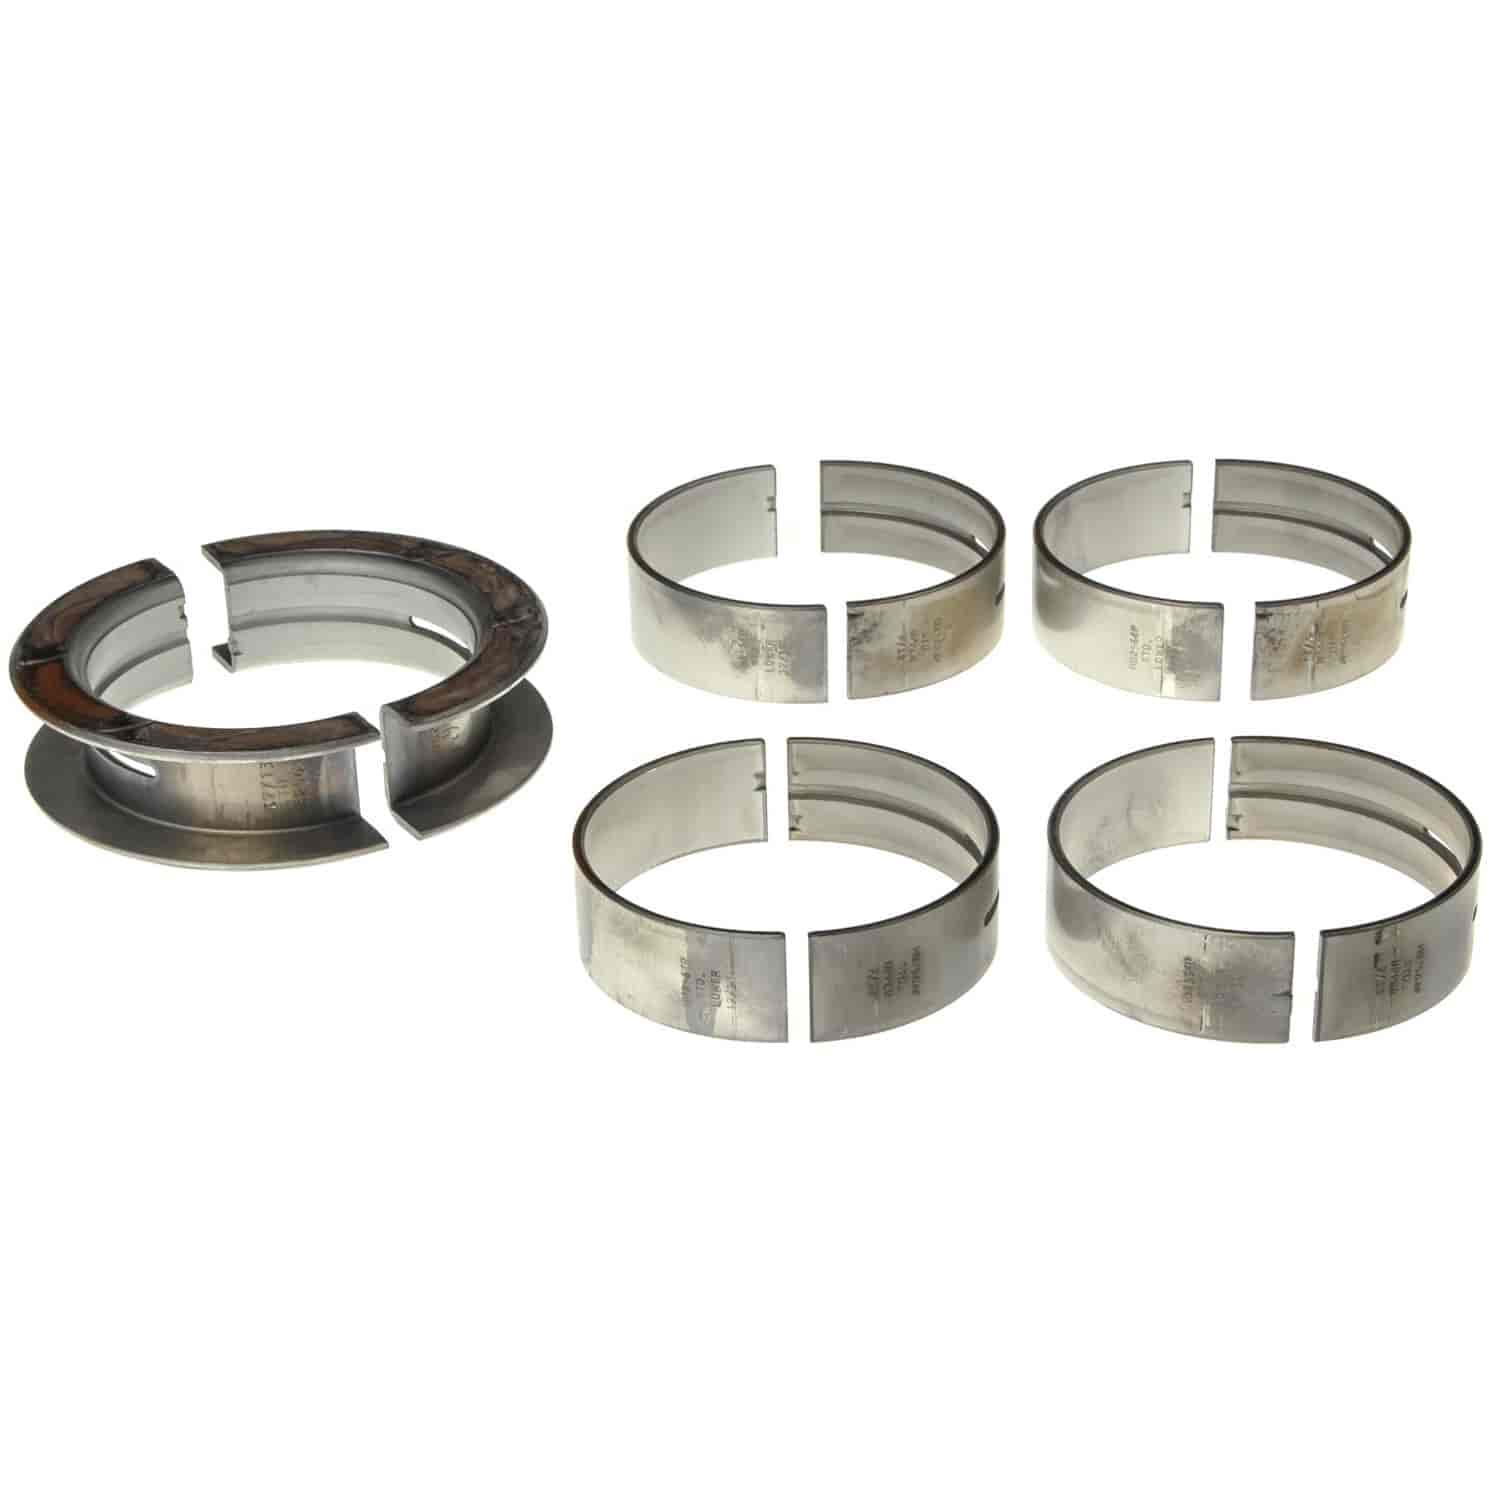 Main Bearing Set Ford 1968-1997 V8 370/429/460 (6.1/7.0/7.5L) with -.010" Undersize